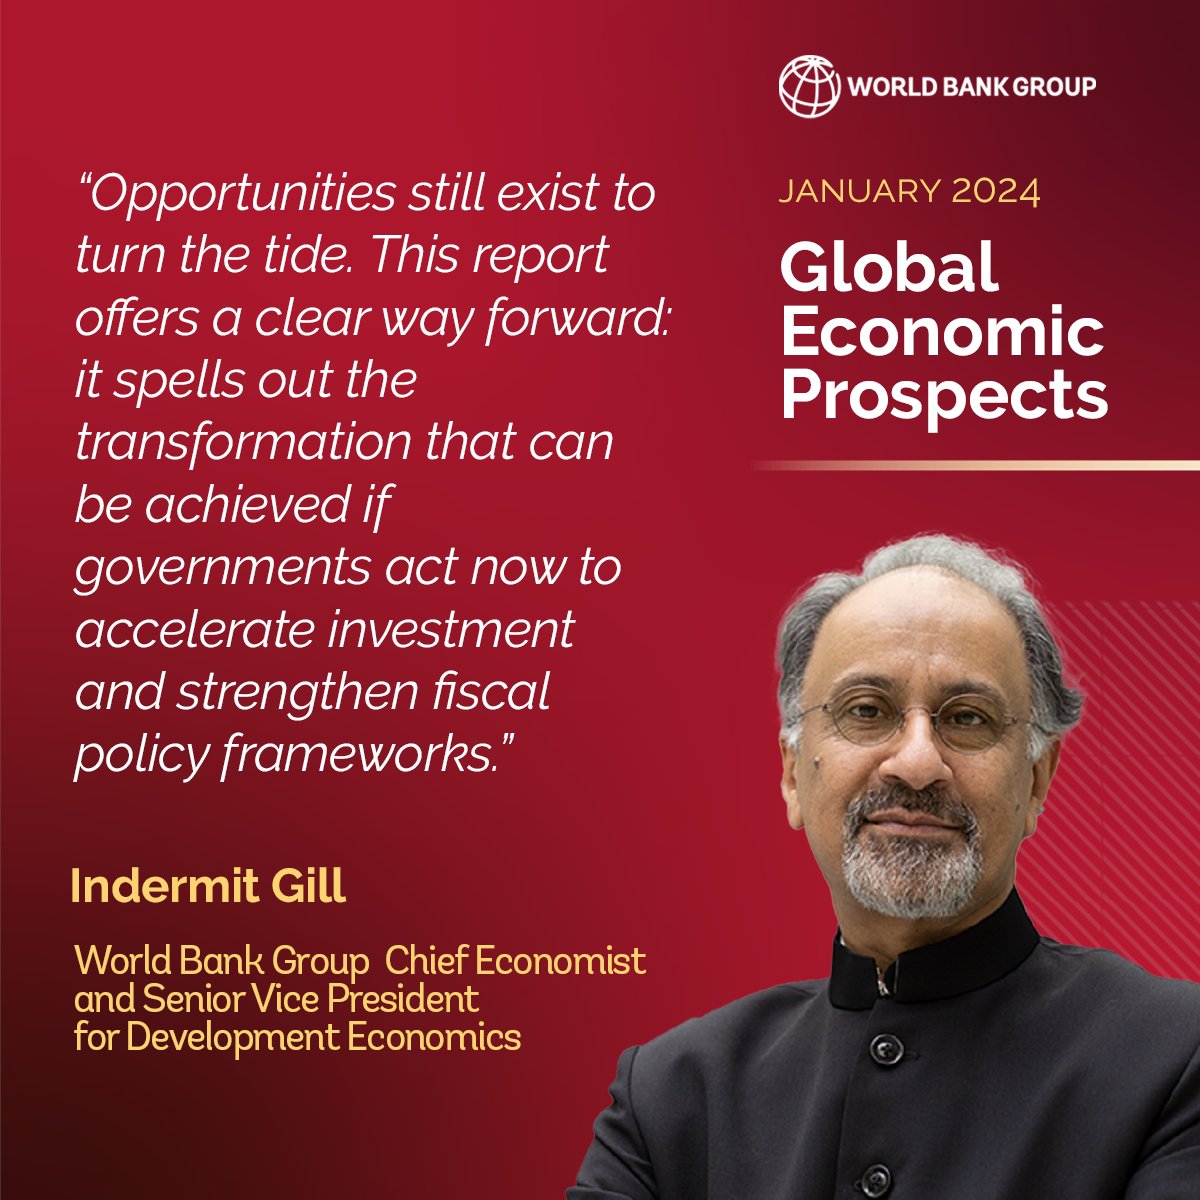 Weak growth risks trapping many developing nations in perilous levels of debt, leaving 1 in 3 people facing severe food shortages and impeding global progress. @IndermitGill Read the #GEP2024 ➡️wrld.bg/lFnF50Qpb1z